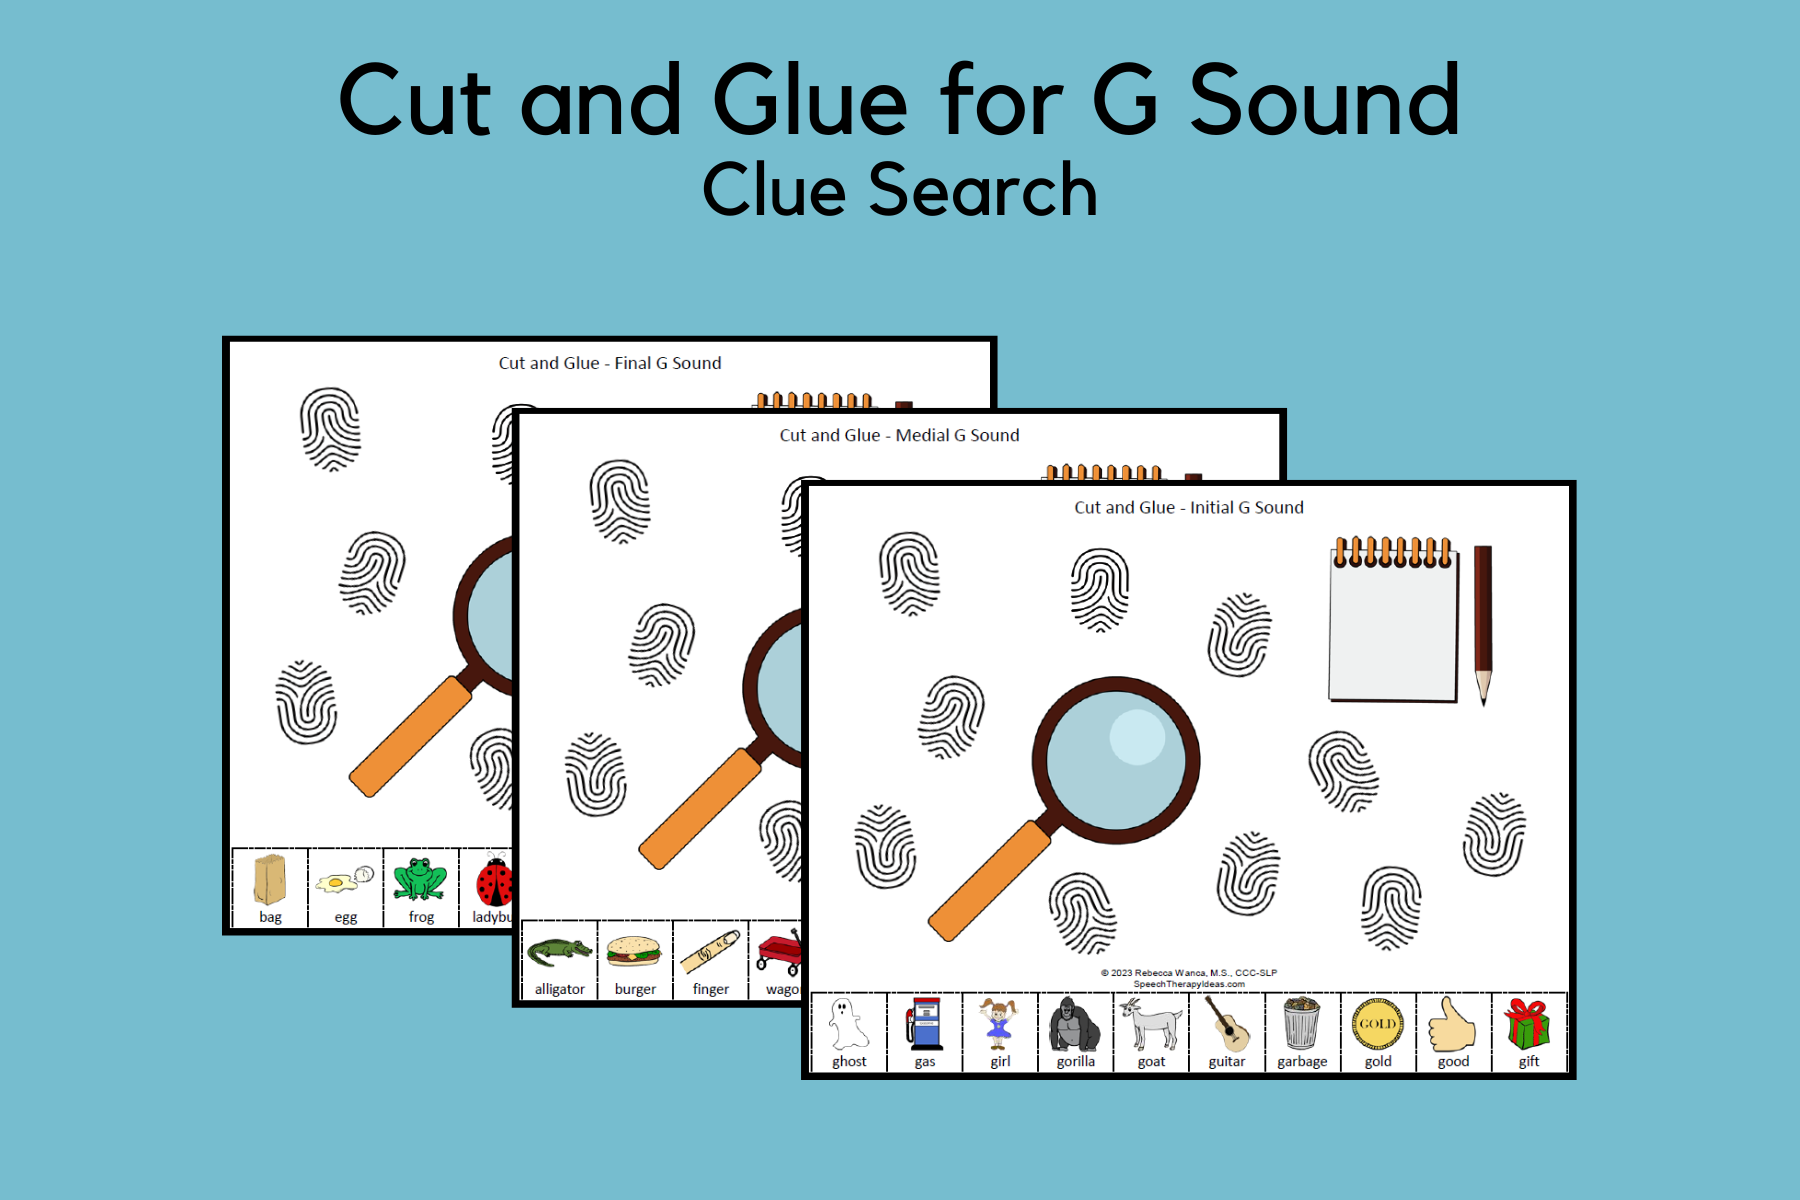 Cut and Glue for G Sound – Clue Search